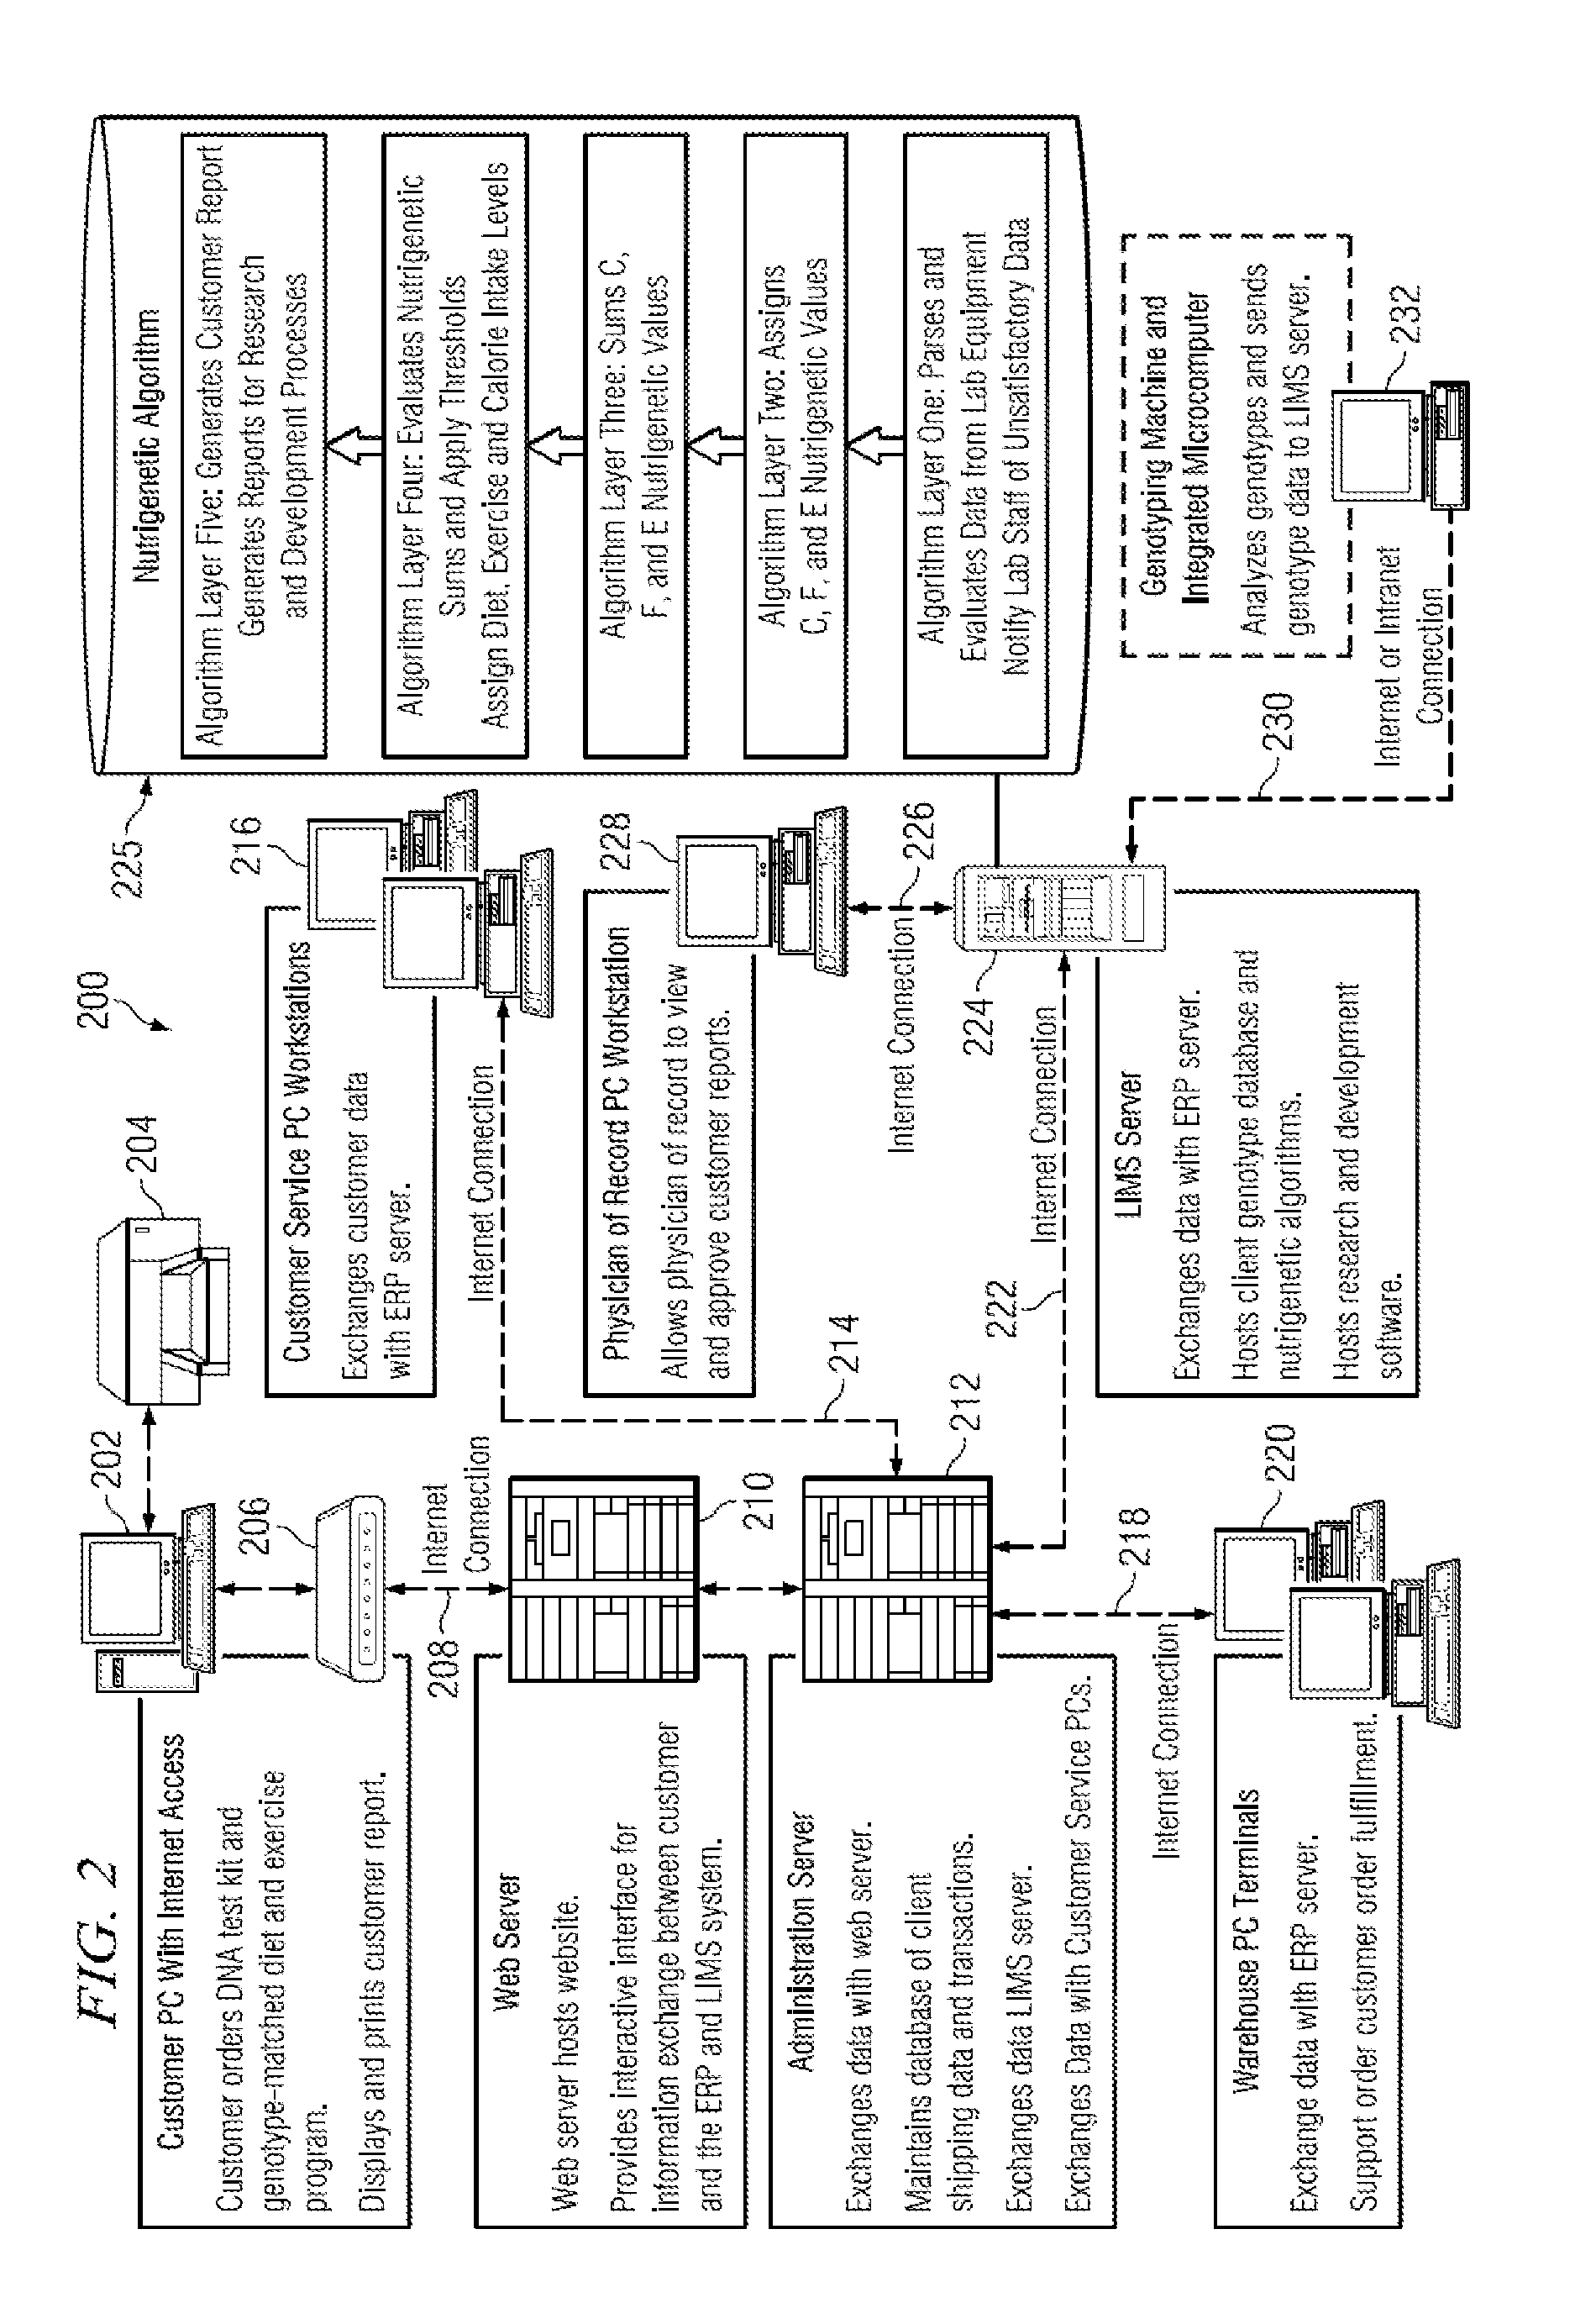 Weight management genetic test systems and methods